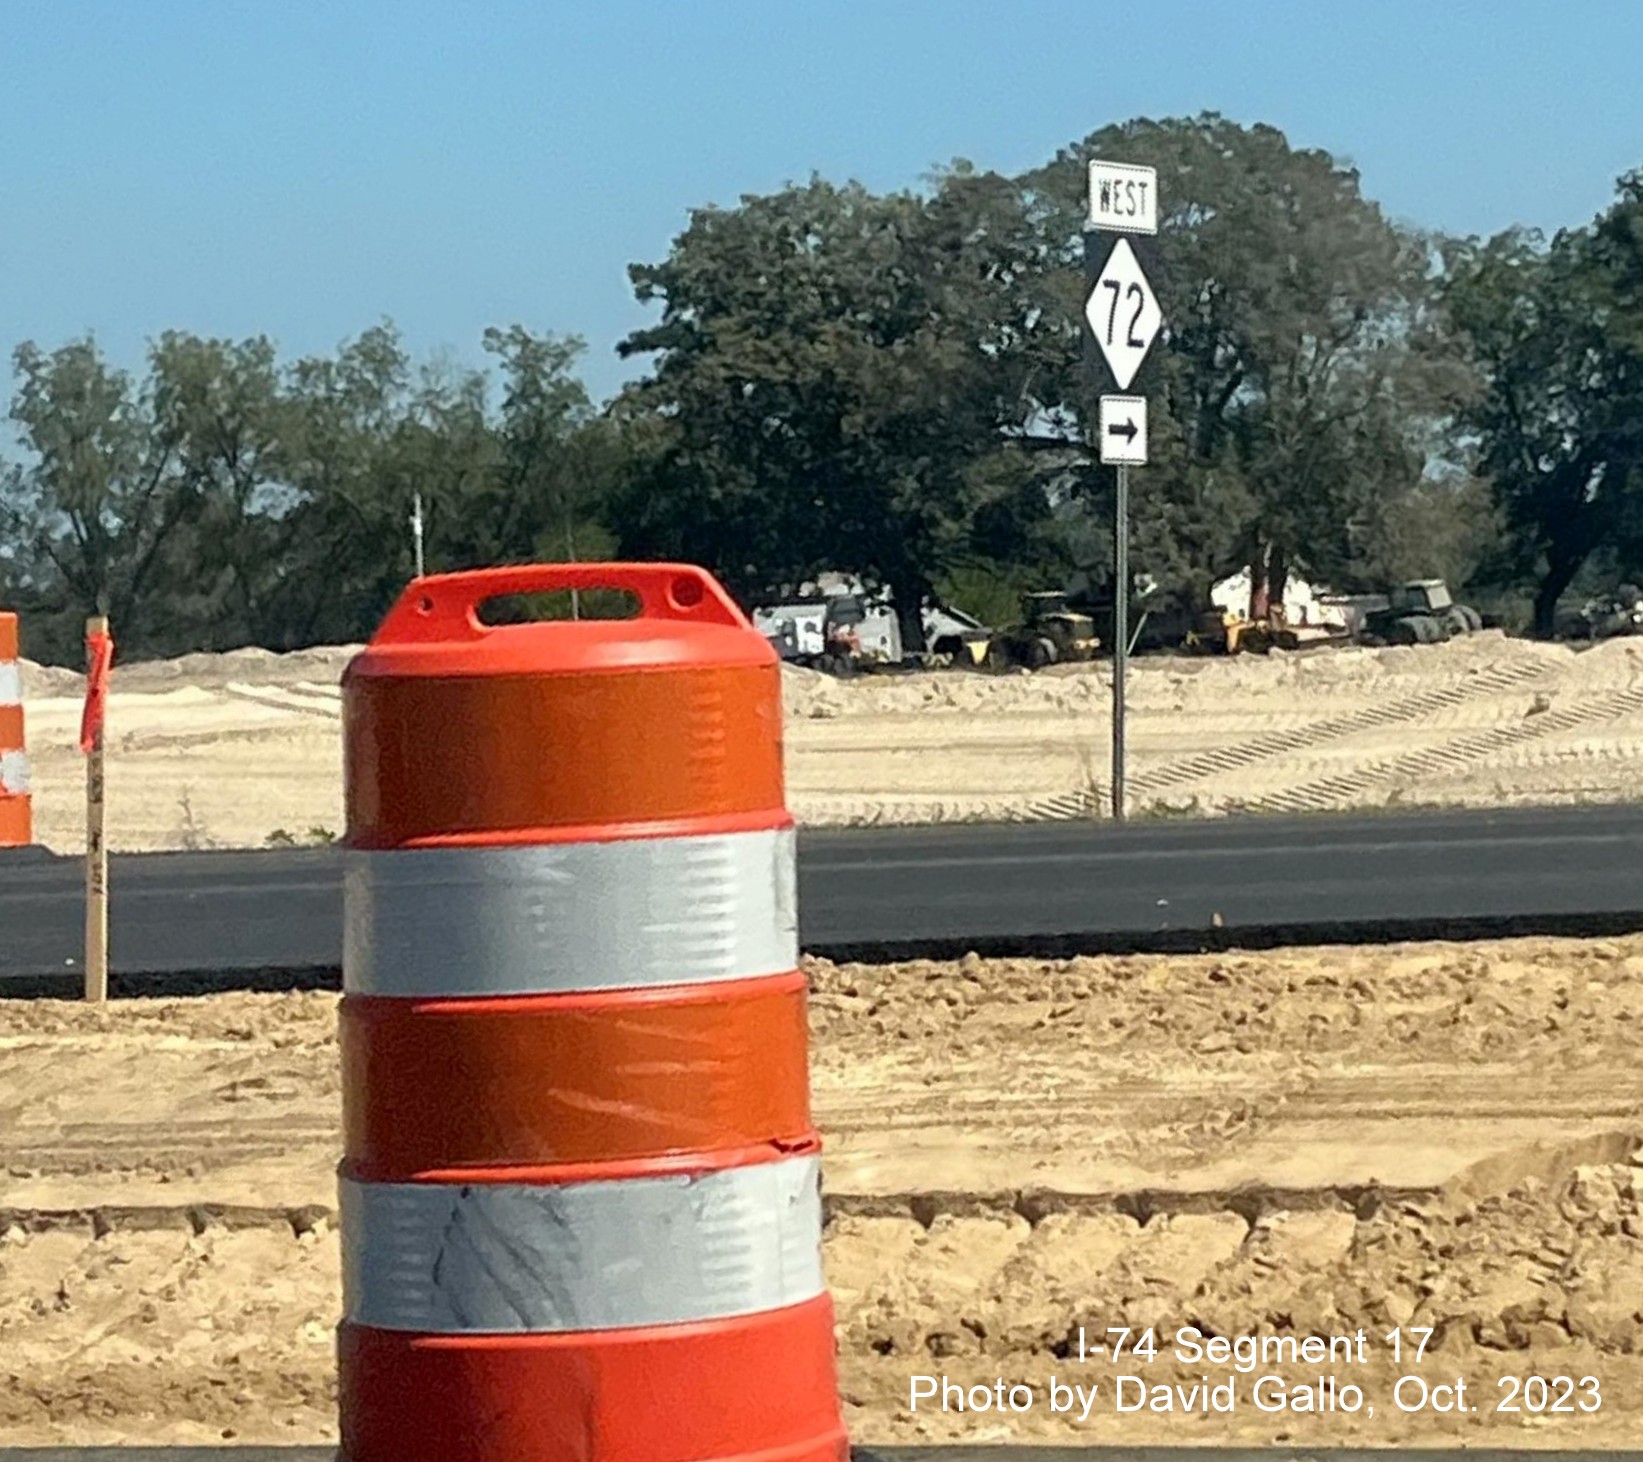 Image of West NC 72 trailblazer near intersection on US 74 West near Boardman as seen from
       eastbound lanes in interchange construction area, by David Gallo, October 2023